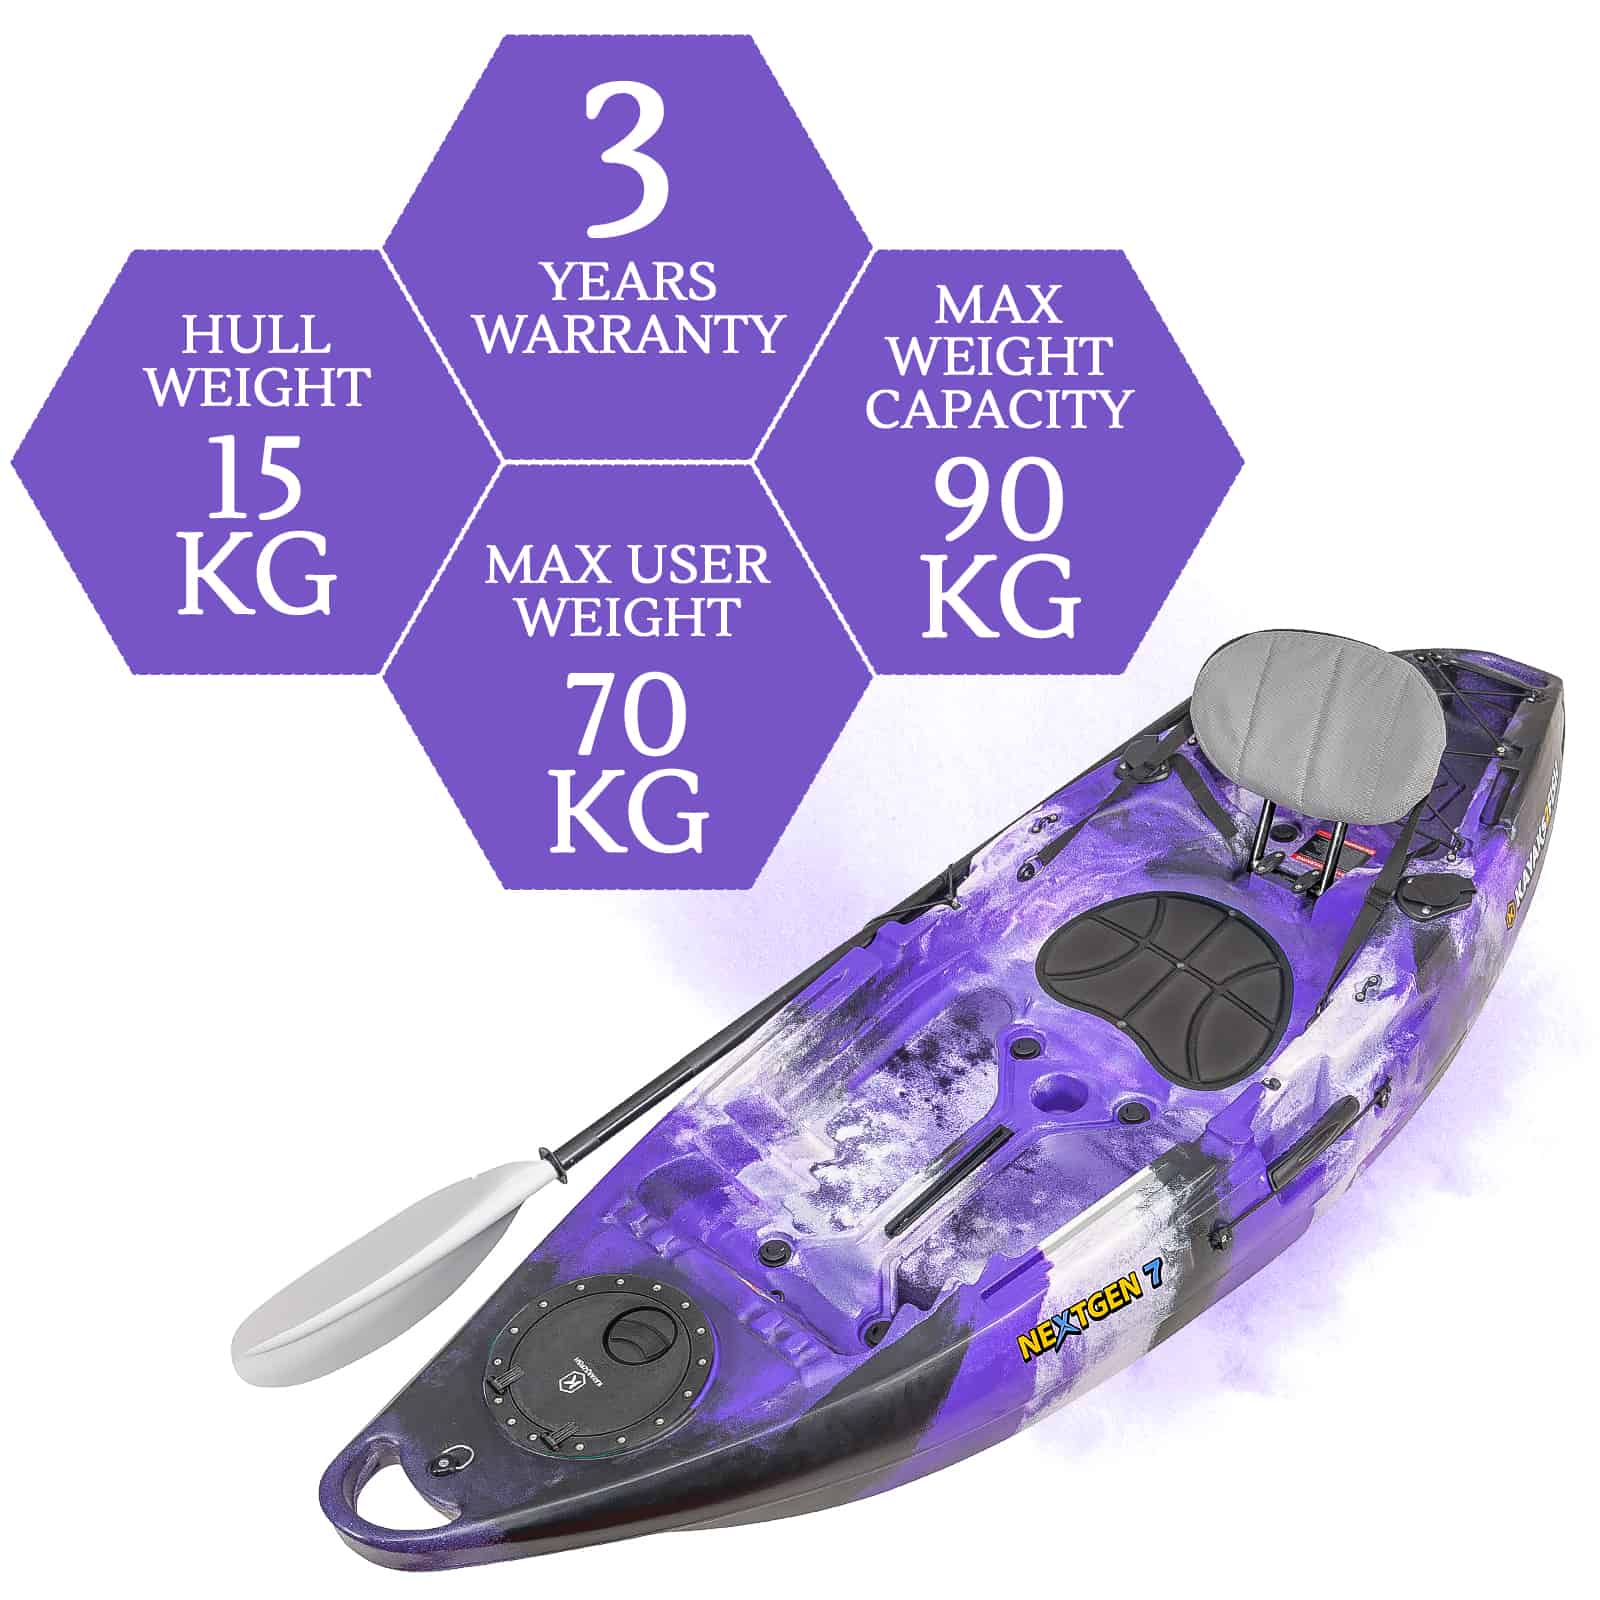 NG-07-PURPLECAMO specifications